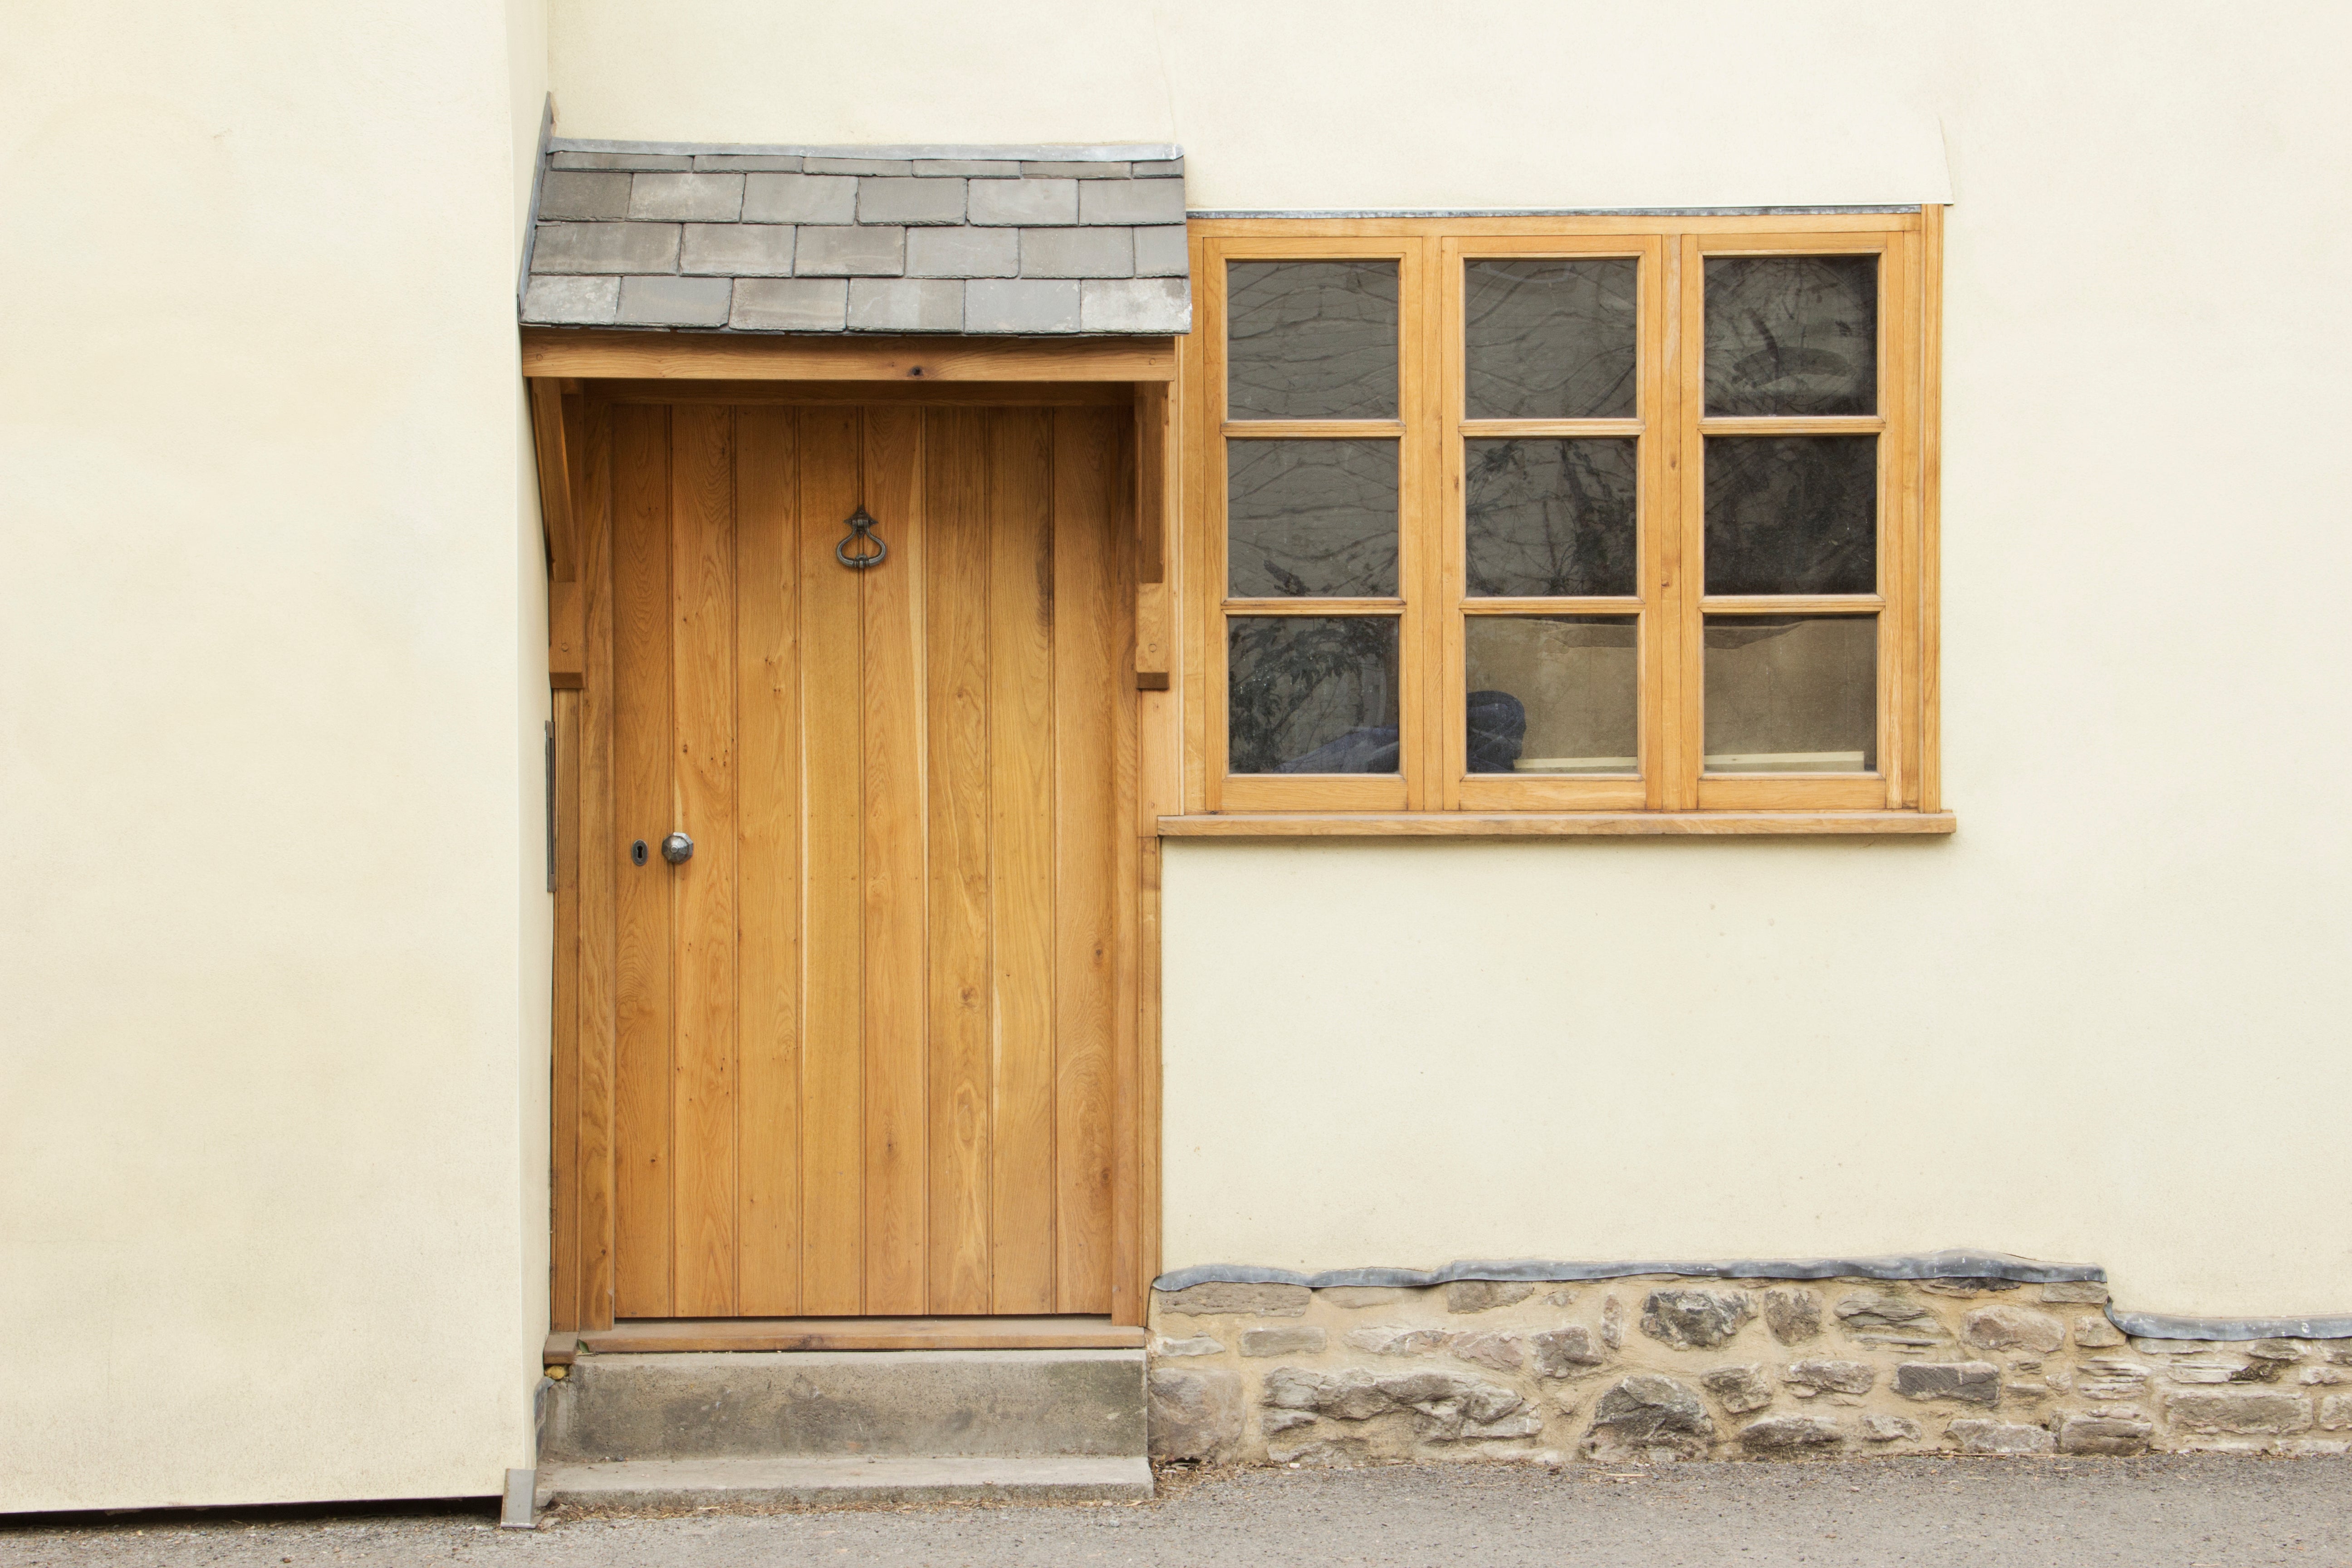 Exterior oak door with an oak box lock fitted to the interior.